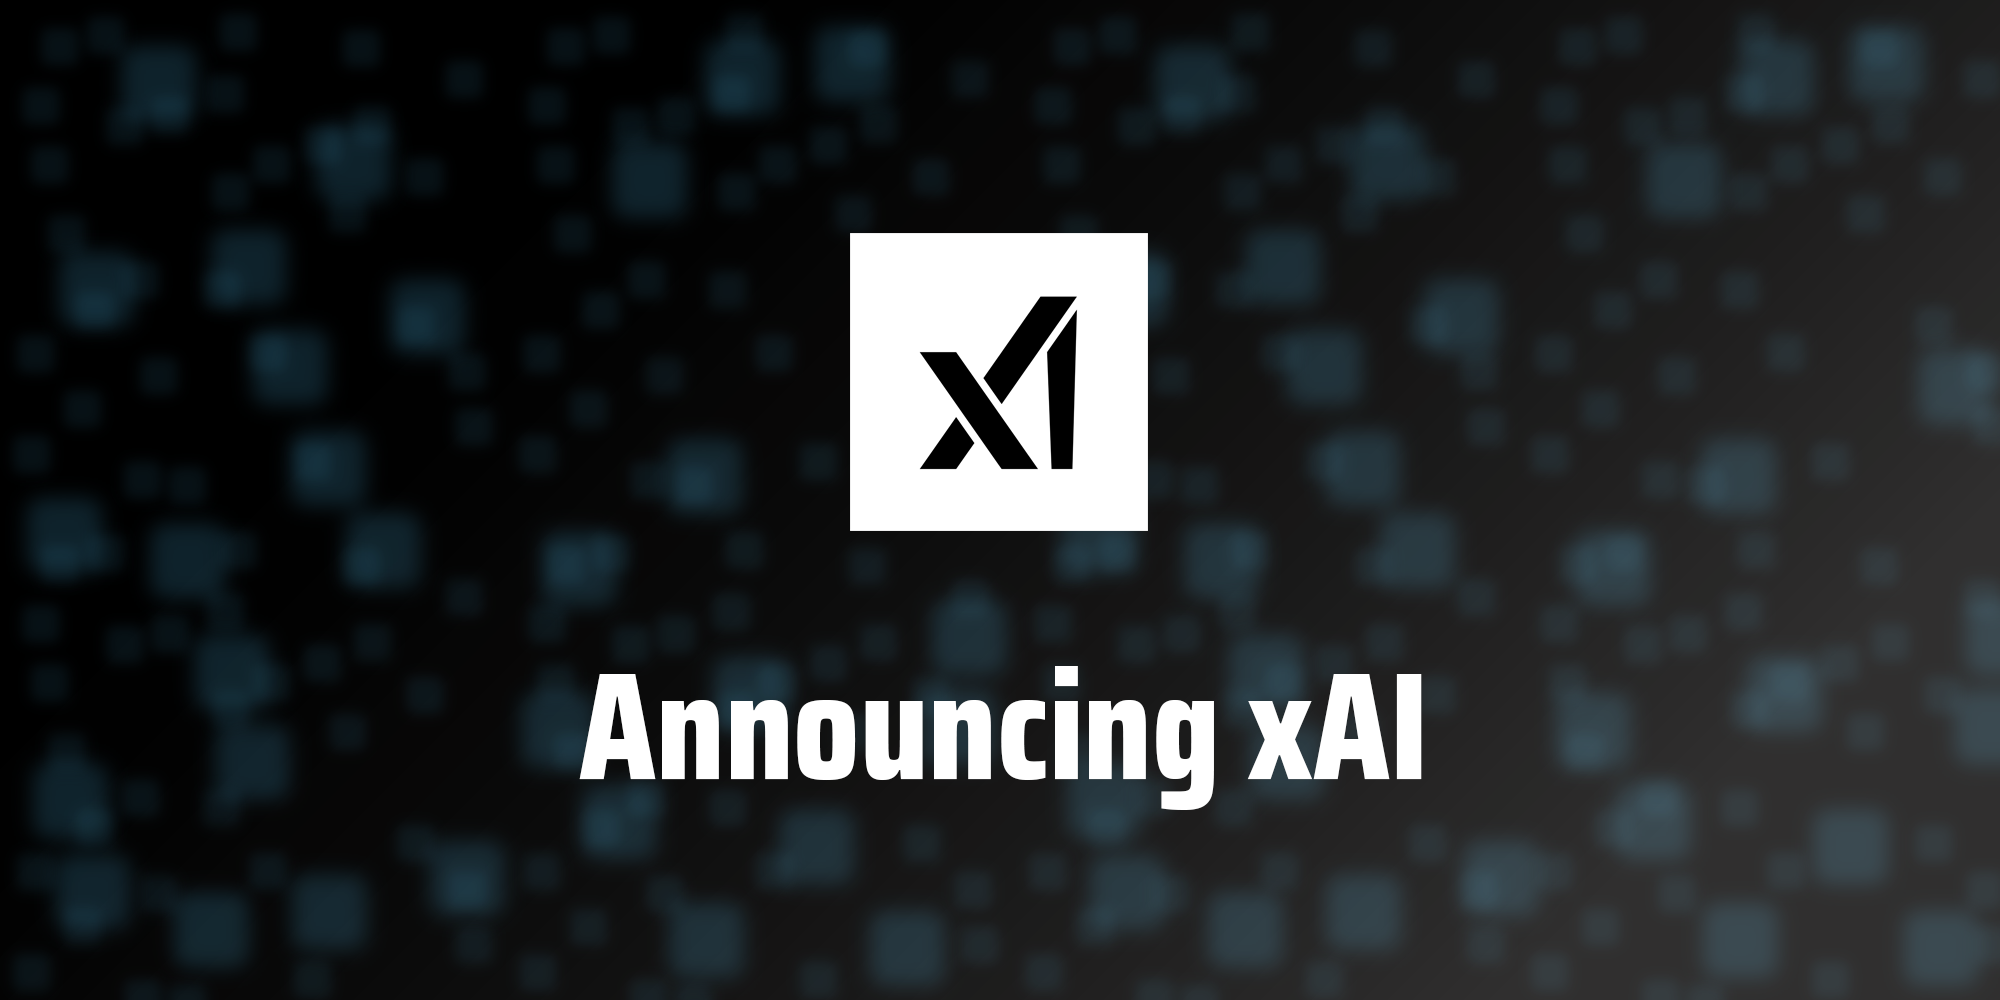 xAI to release first artificial intelligence model for a 'select group of users'